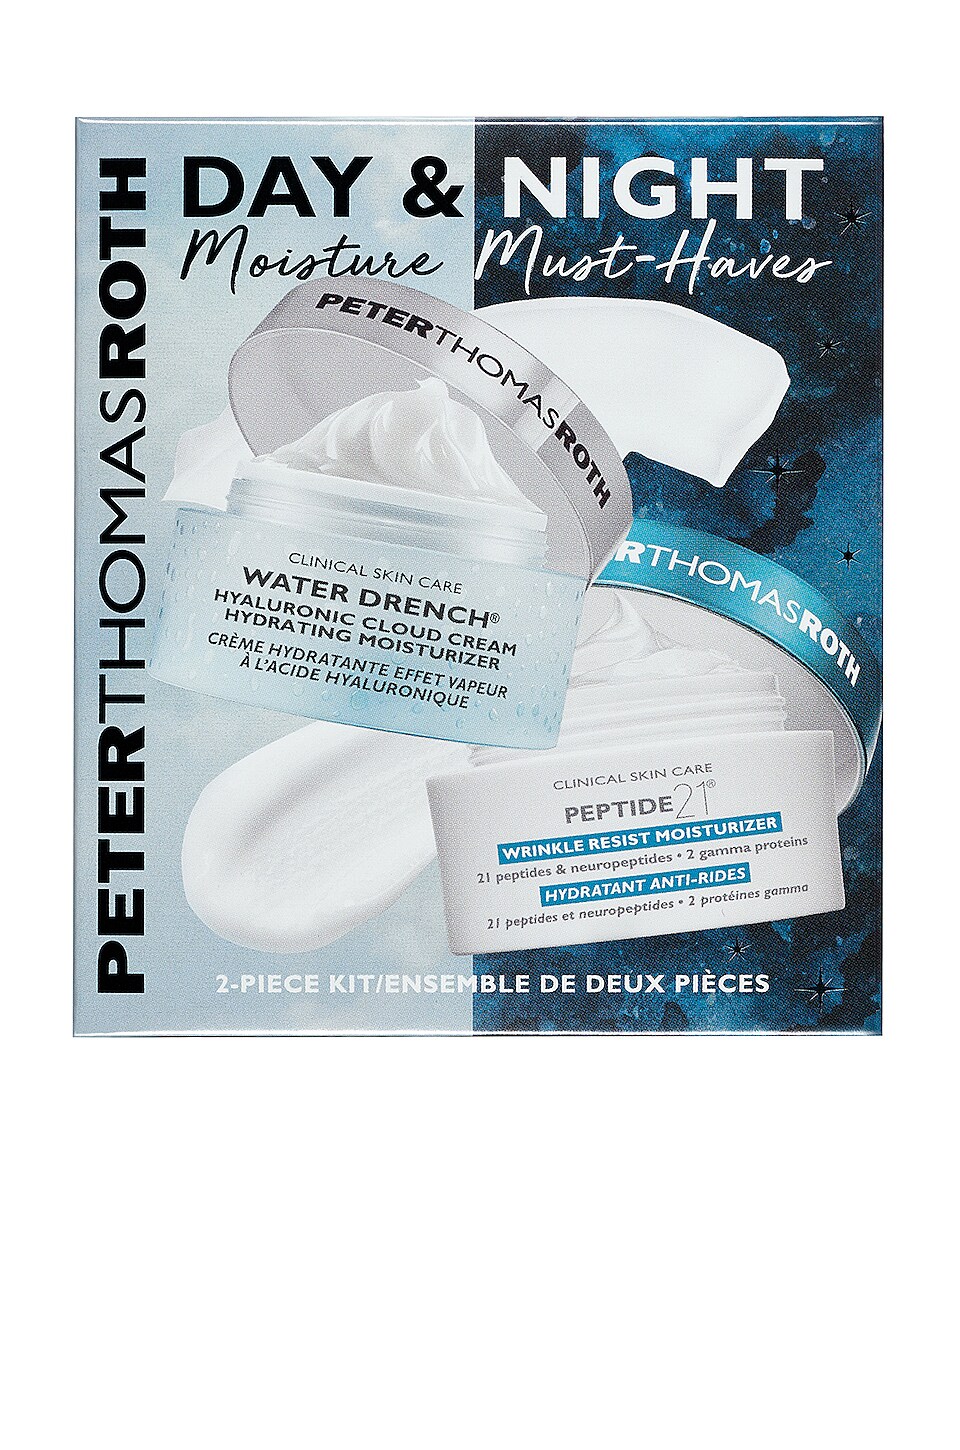 PETER THOMAS ROTH Beauty sets DAY & NIGHT MOISTURE MUST-HAVES KIT